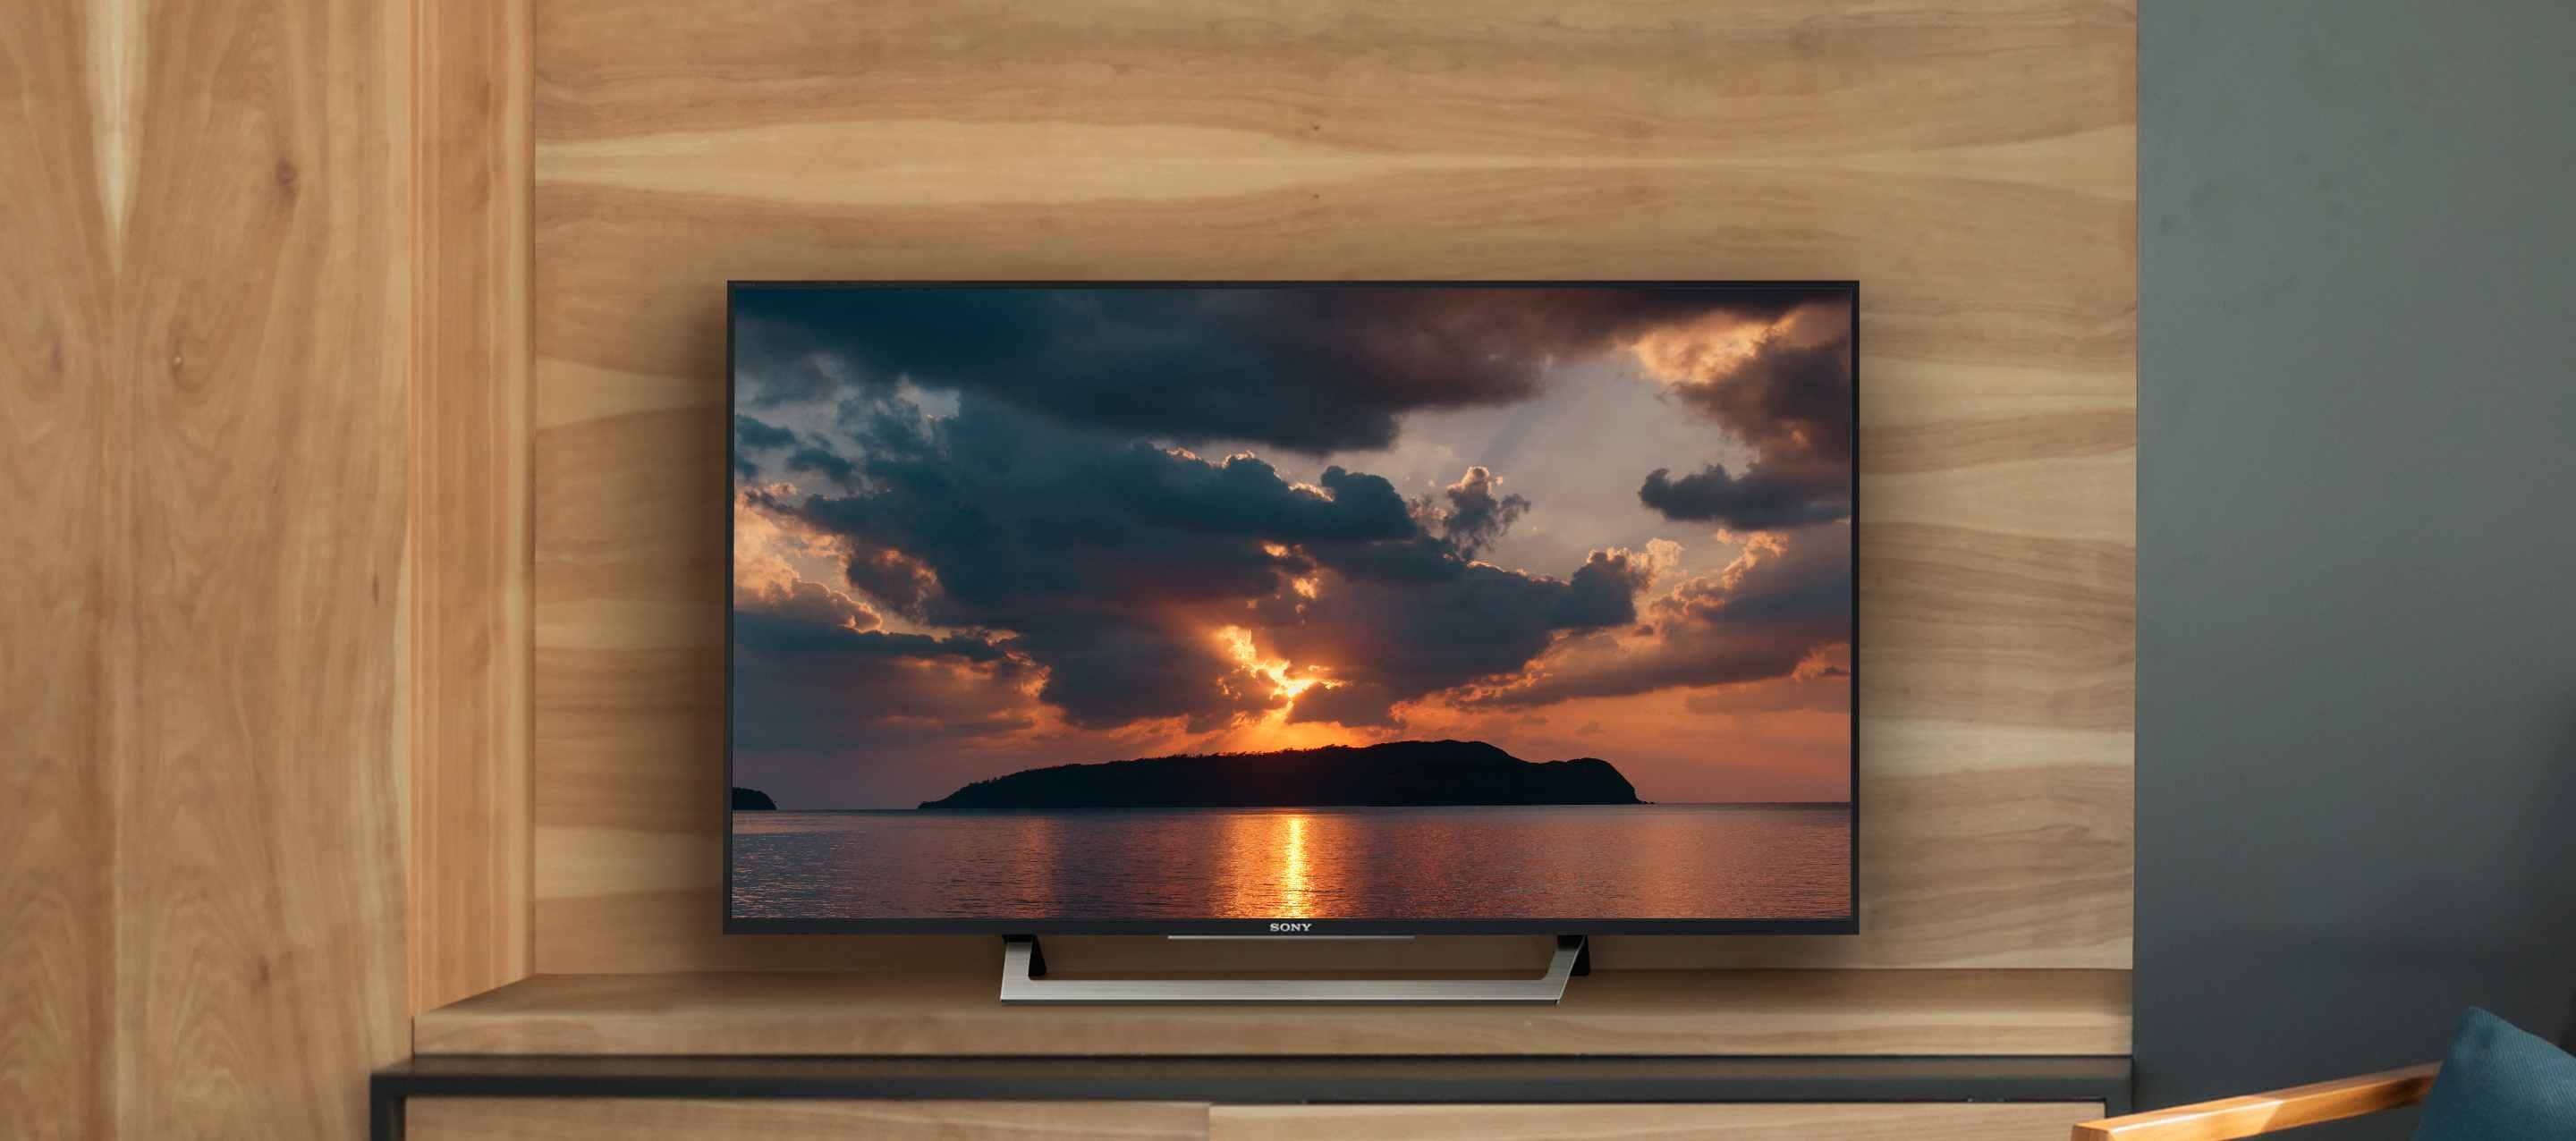 Meet the budget-friendly Sony XD83, XD80, XD75, XD70 and SD80 4K Android  TVs | by Sohrab Osati | Sony Reconsidered